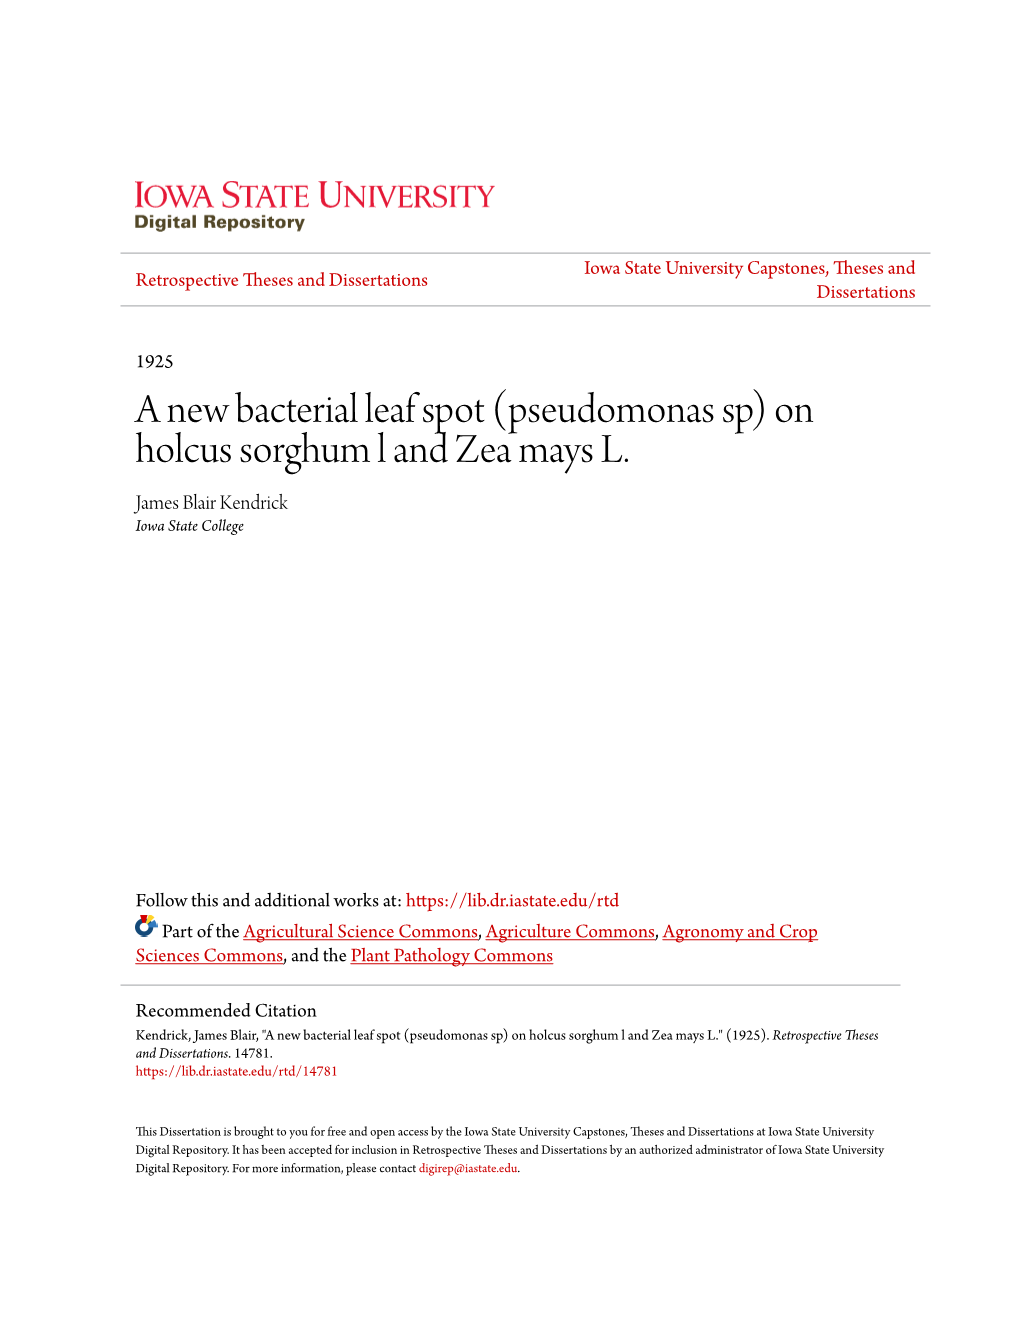 A New Bacterial Leaf Spot (Pseudomonas Sp) on Holcus Sorghum L and Zea Mays L. James Blair Kendrick Iowa State College